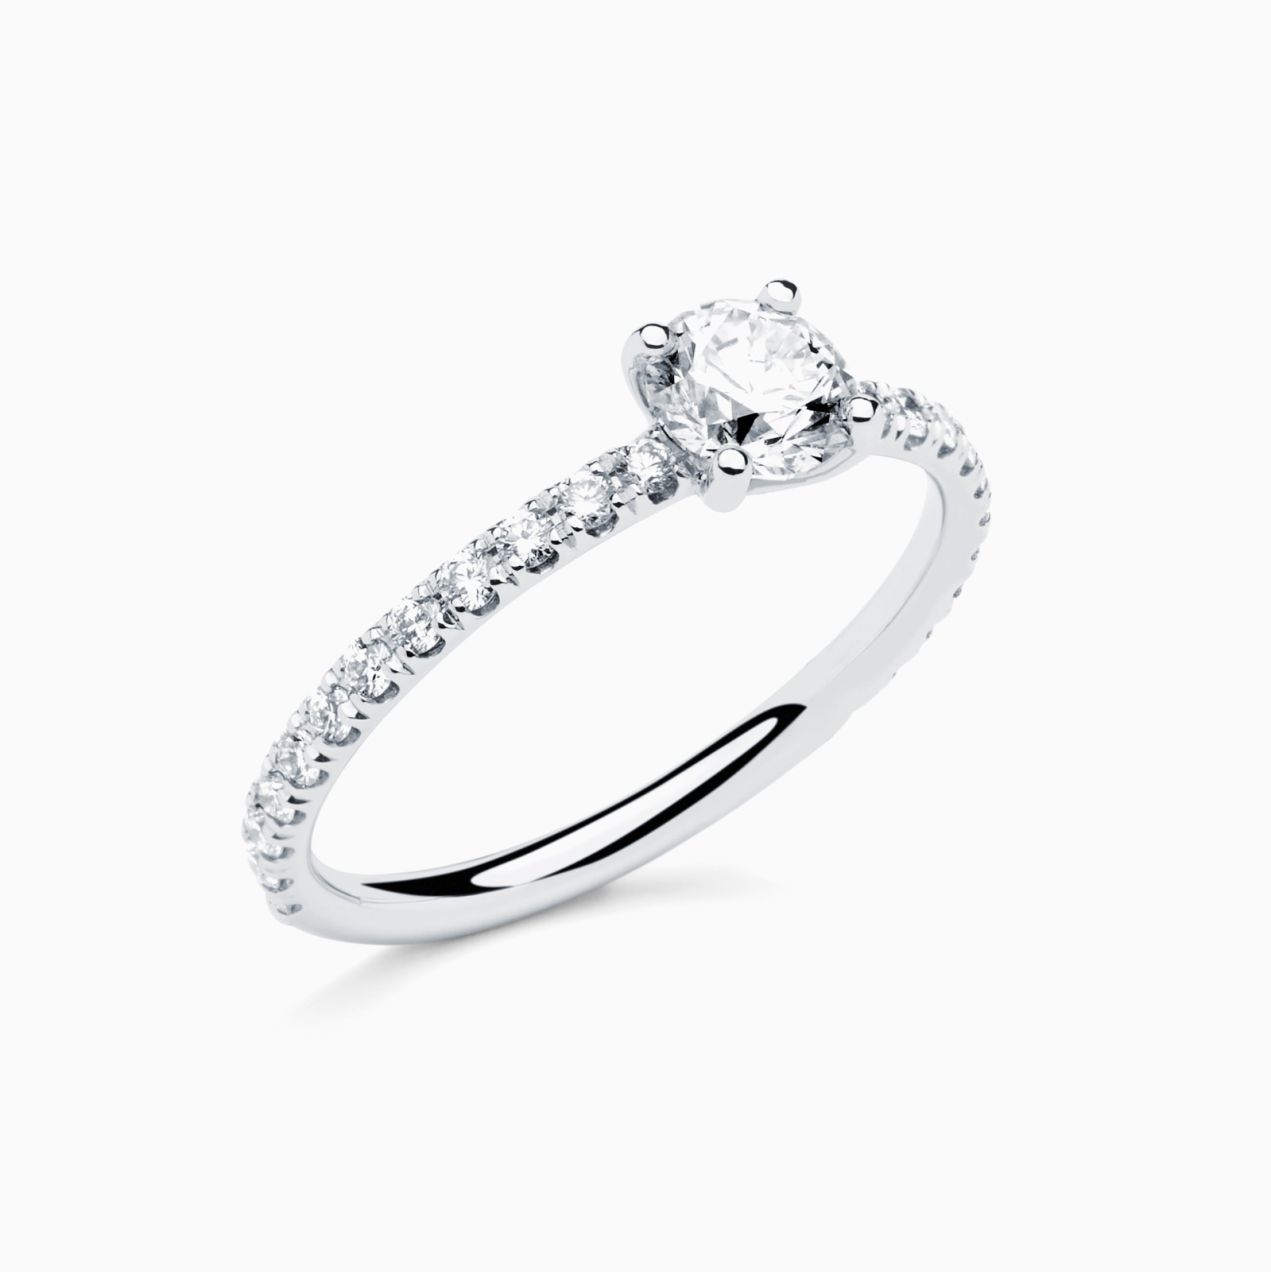 White gold engagement ring with central diamond